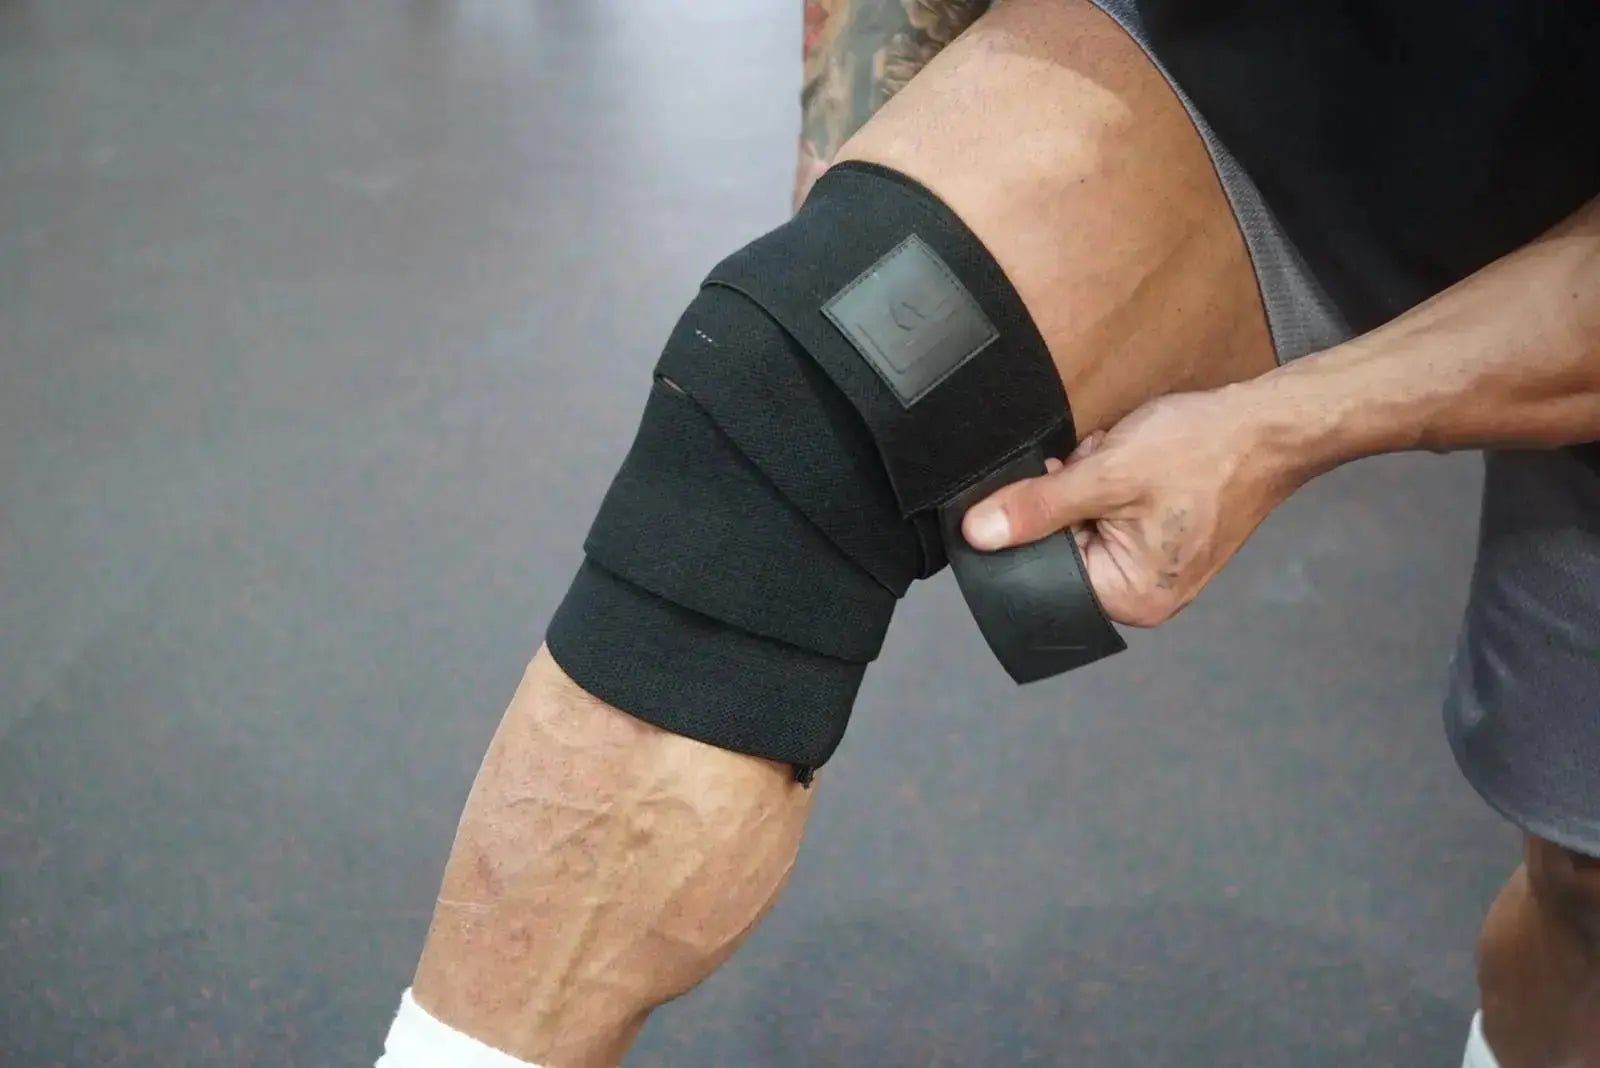 Clearance - Apex Knee Wraps - Gunsmith Fitness